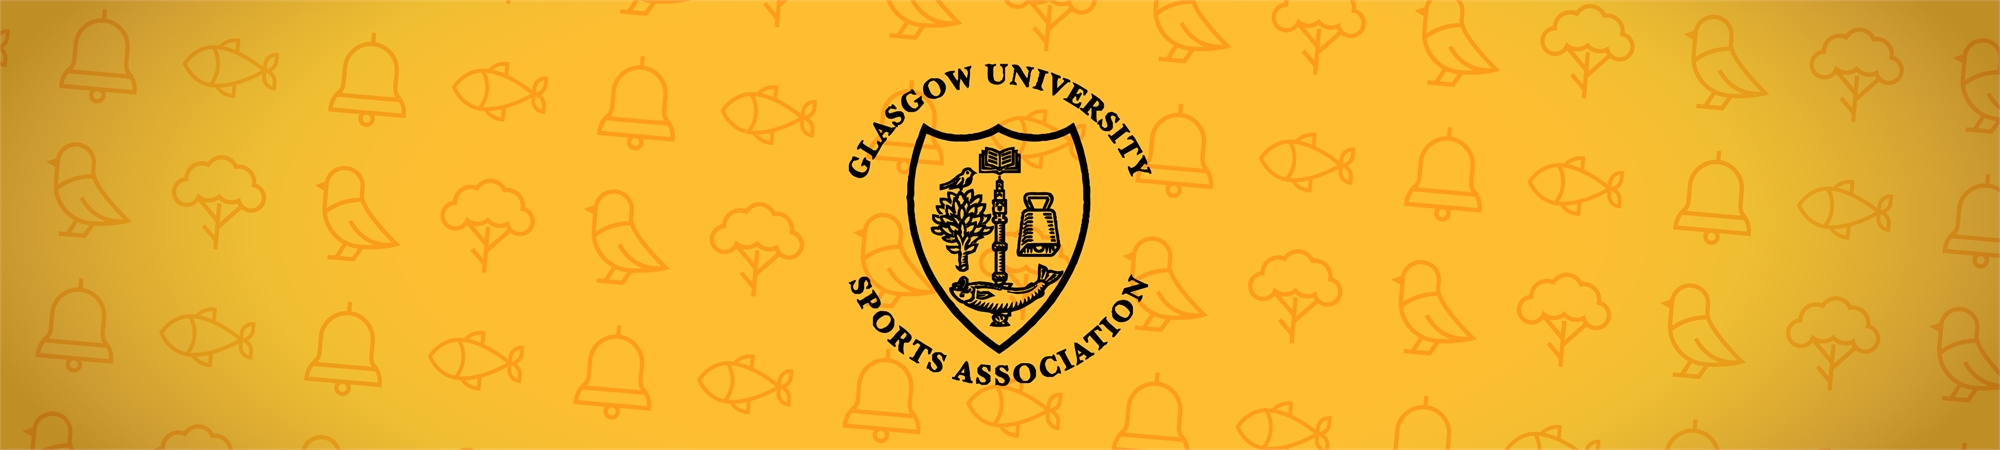 Learn more about GUSA - Glasgow University Sports Association